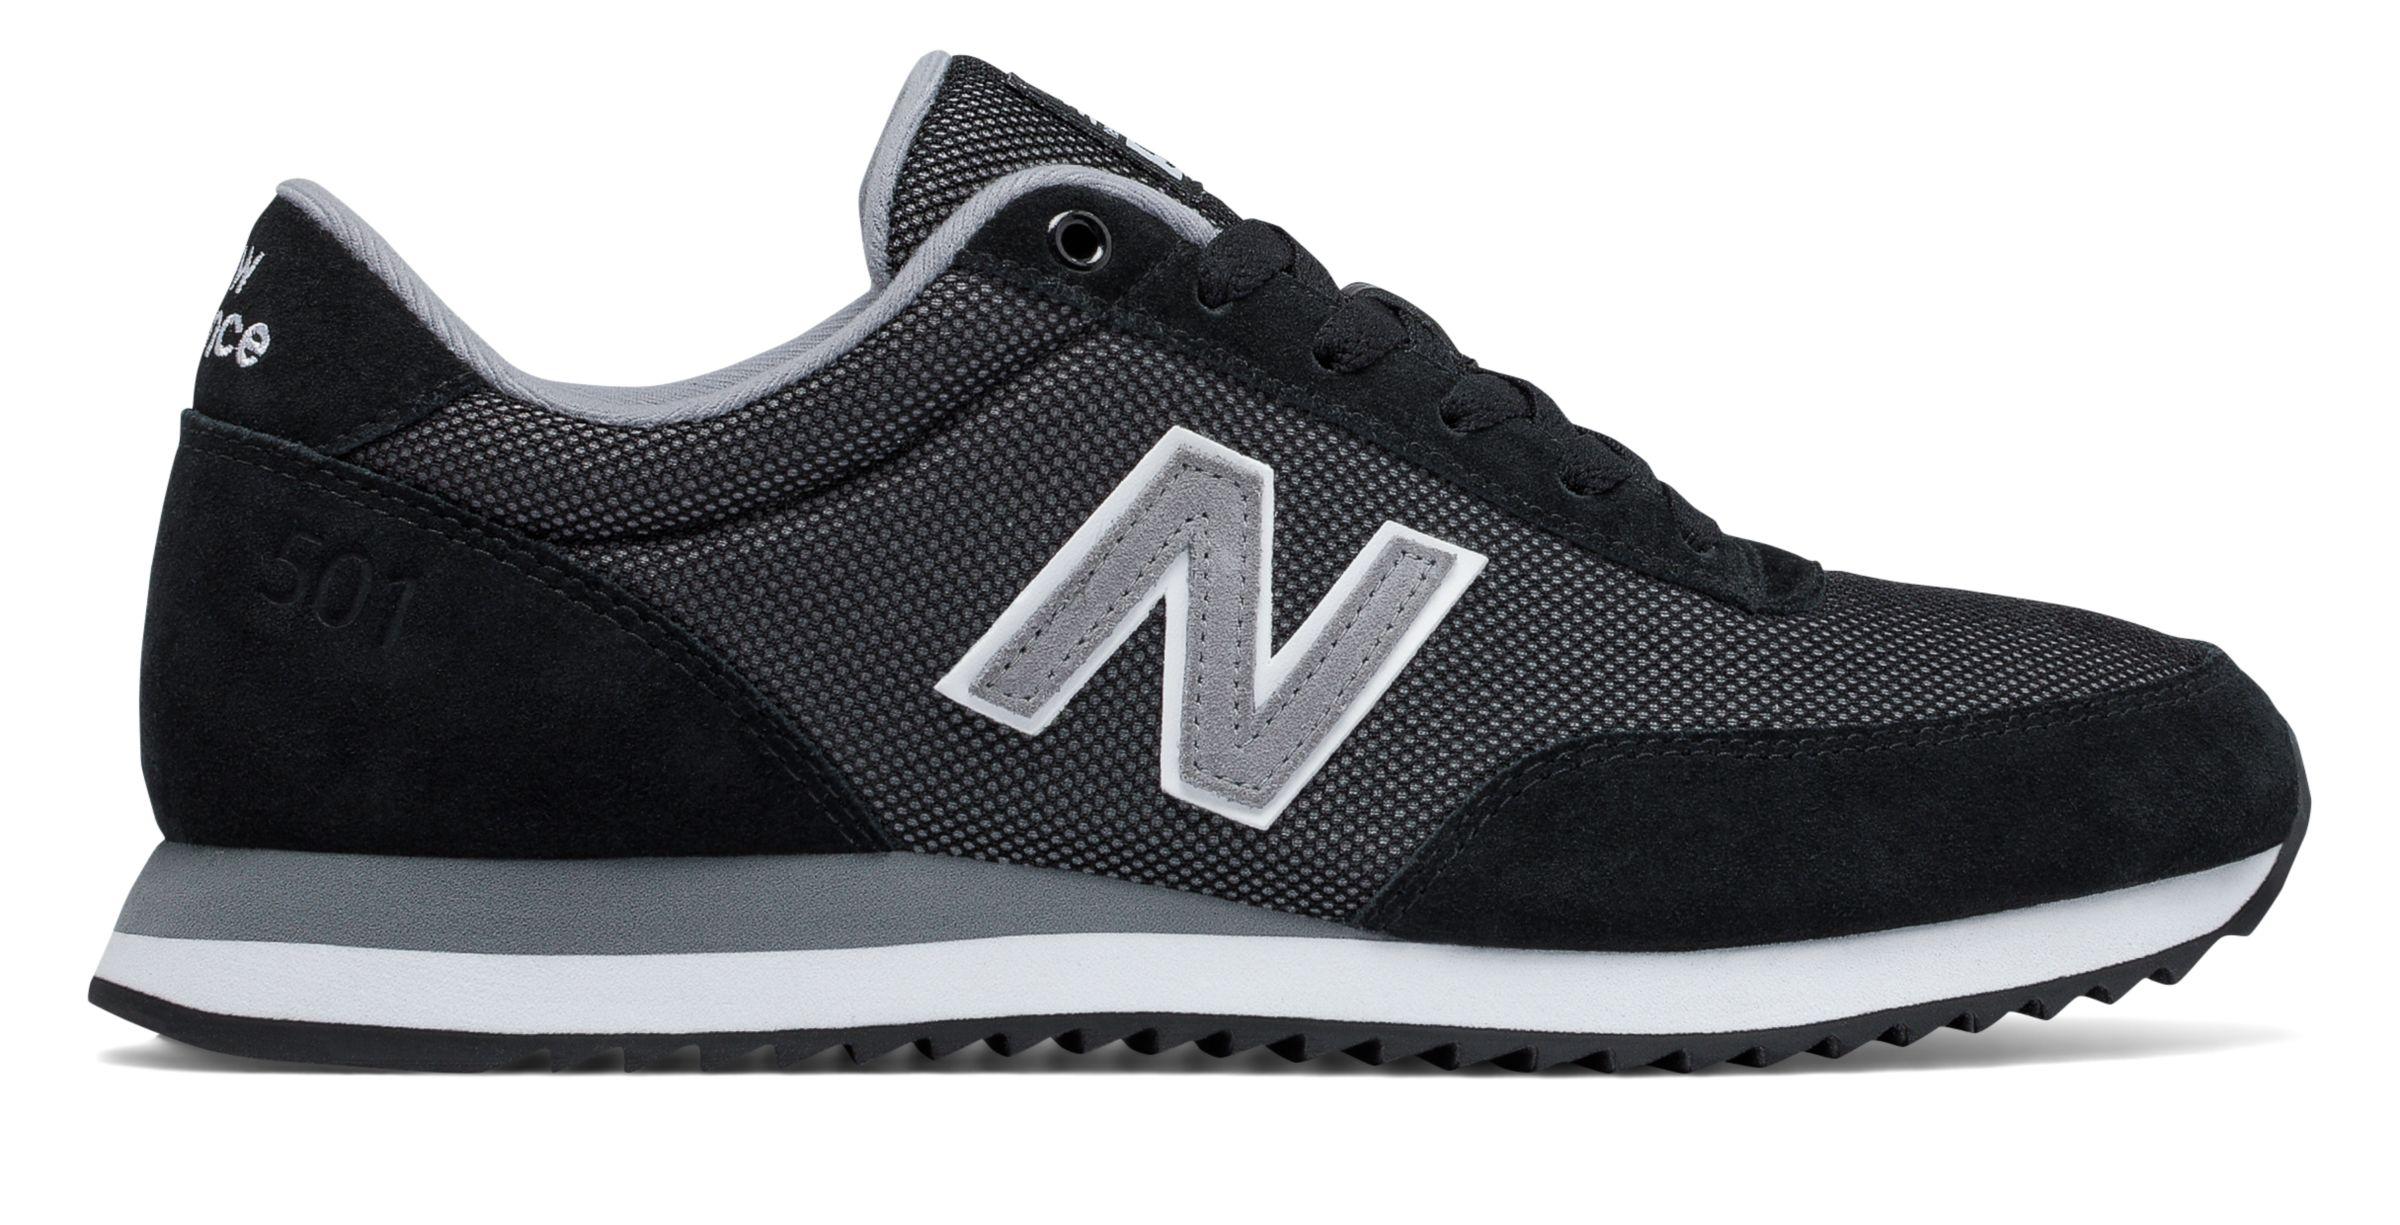 New Balance Rubber 501 Ripple Sole in Black - Lyst